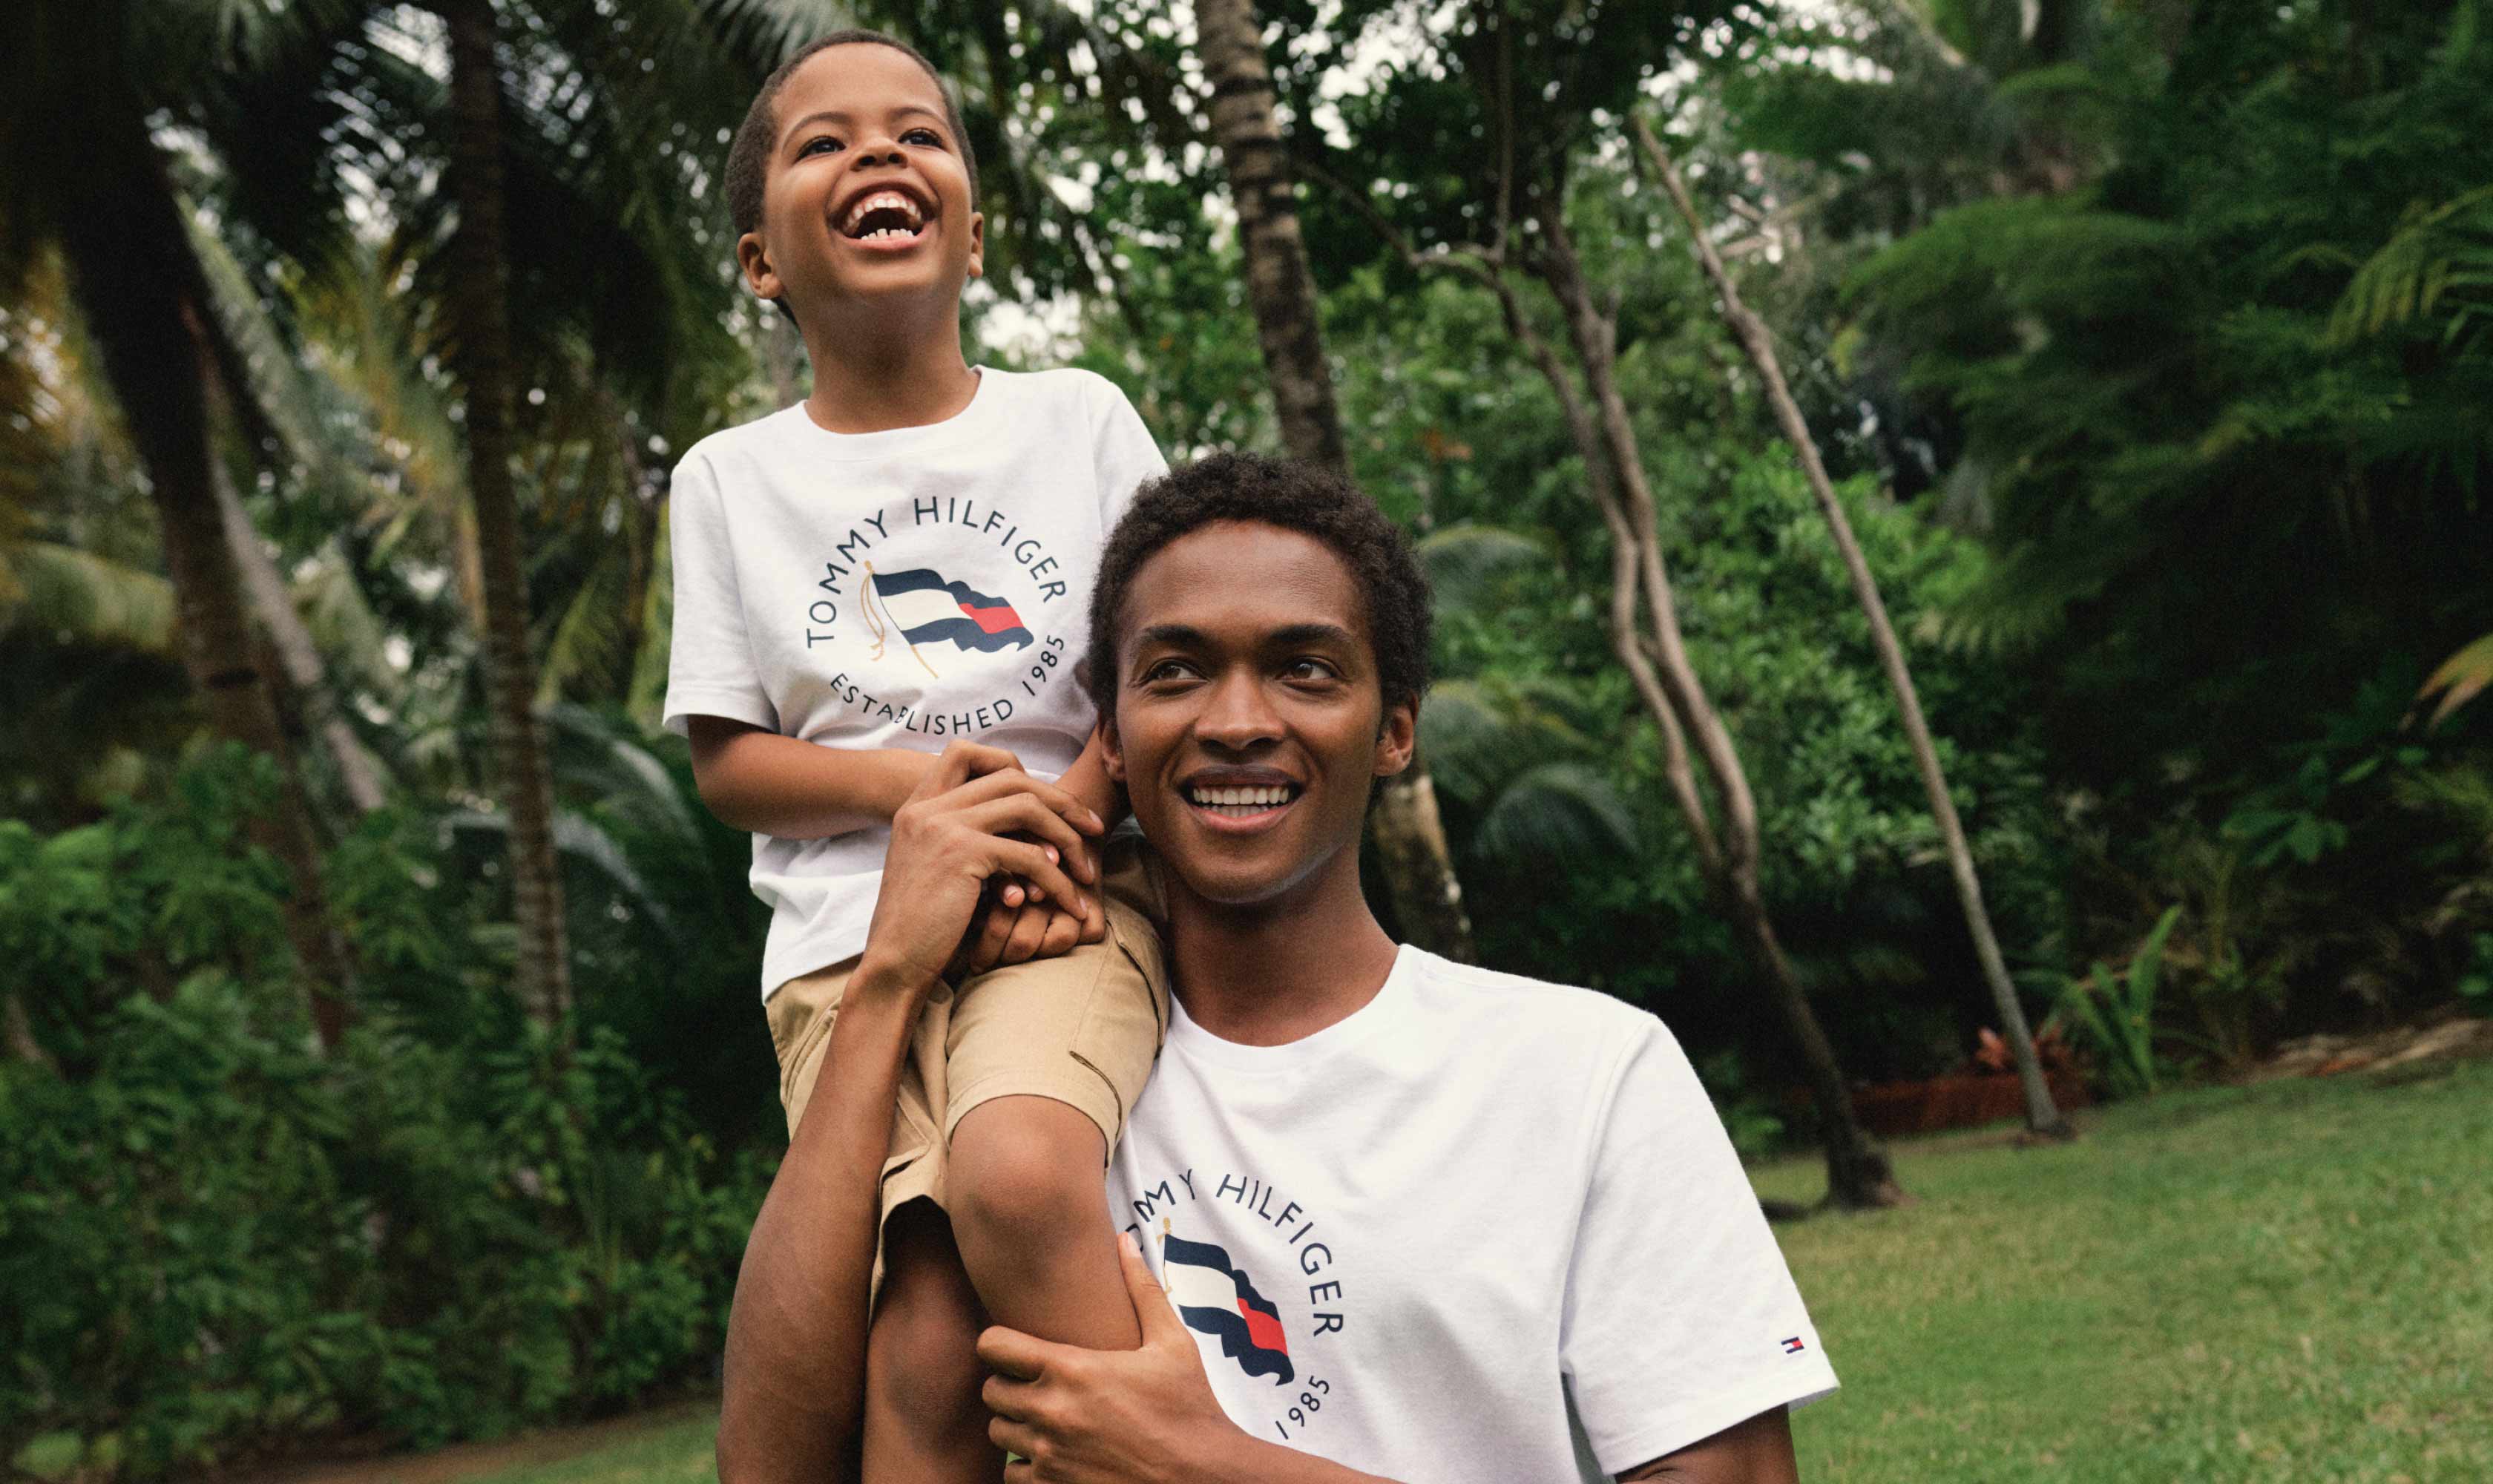 A father and son wear matching t-shirts from Tommy Hilfiger.